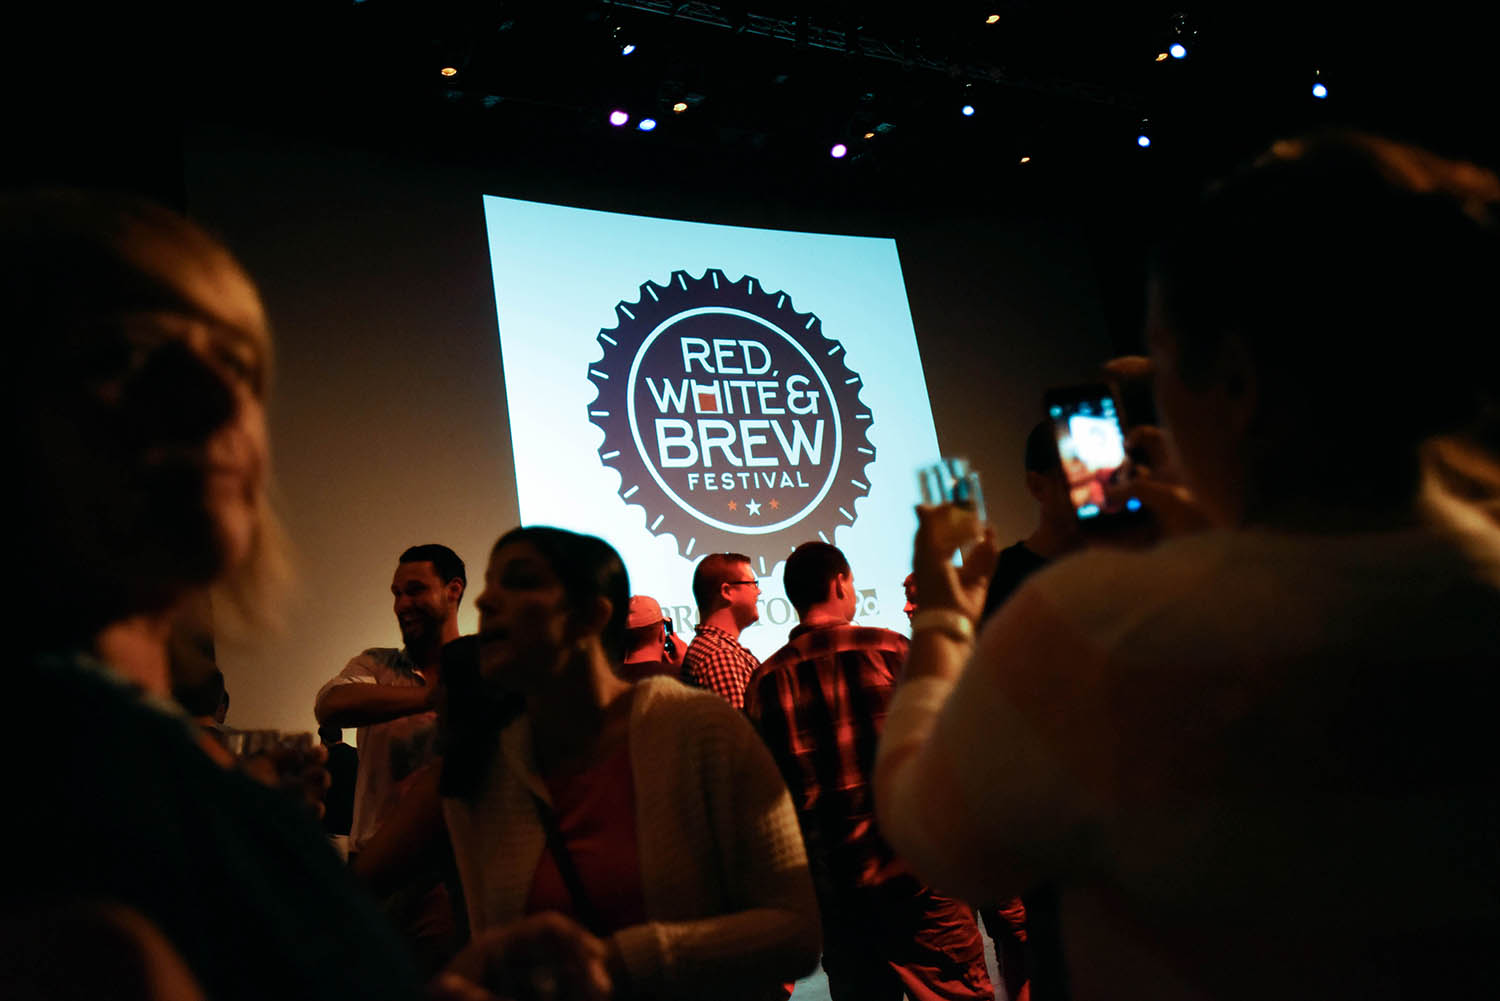 Hundreds of people kicked off their July 4th holiday weekend at Red, White & Brew at Proctors Friday, June 30, 2017.